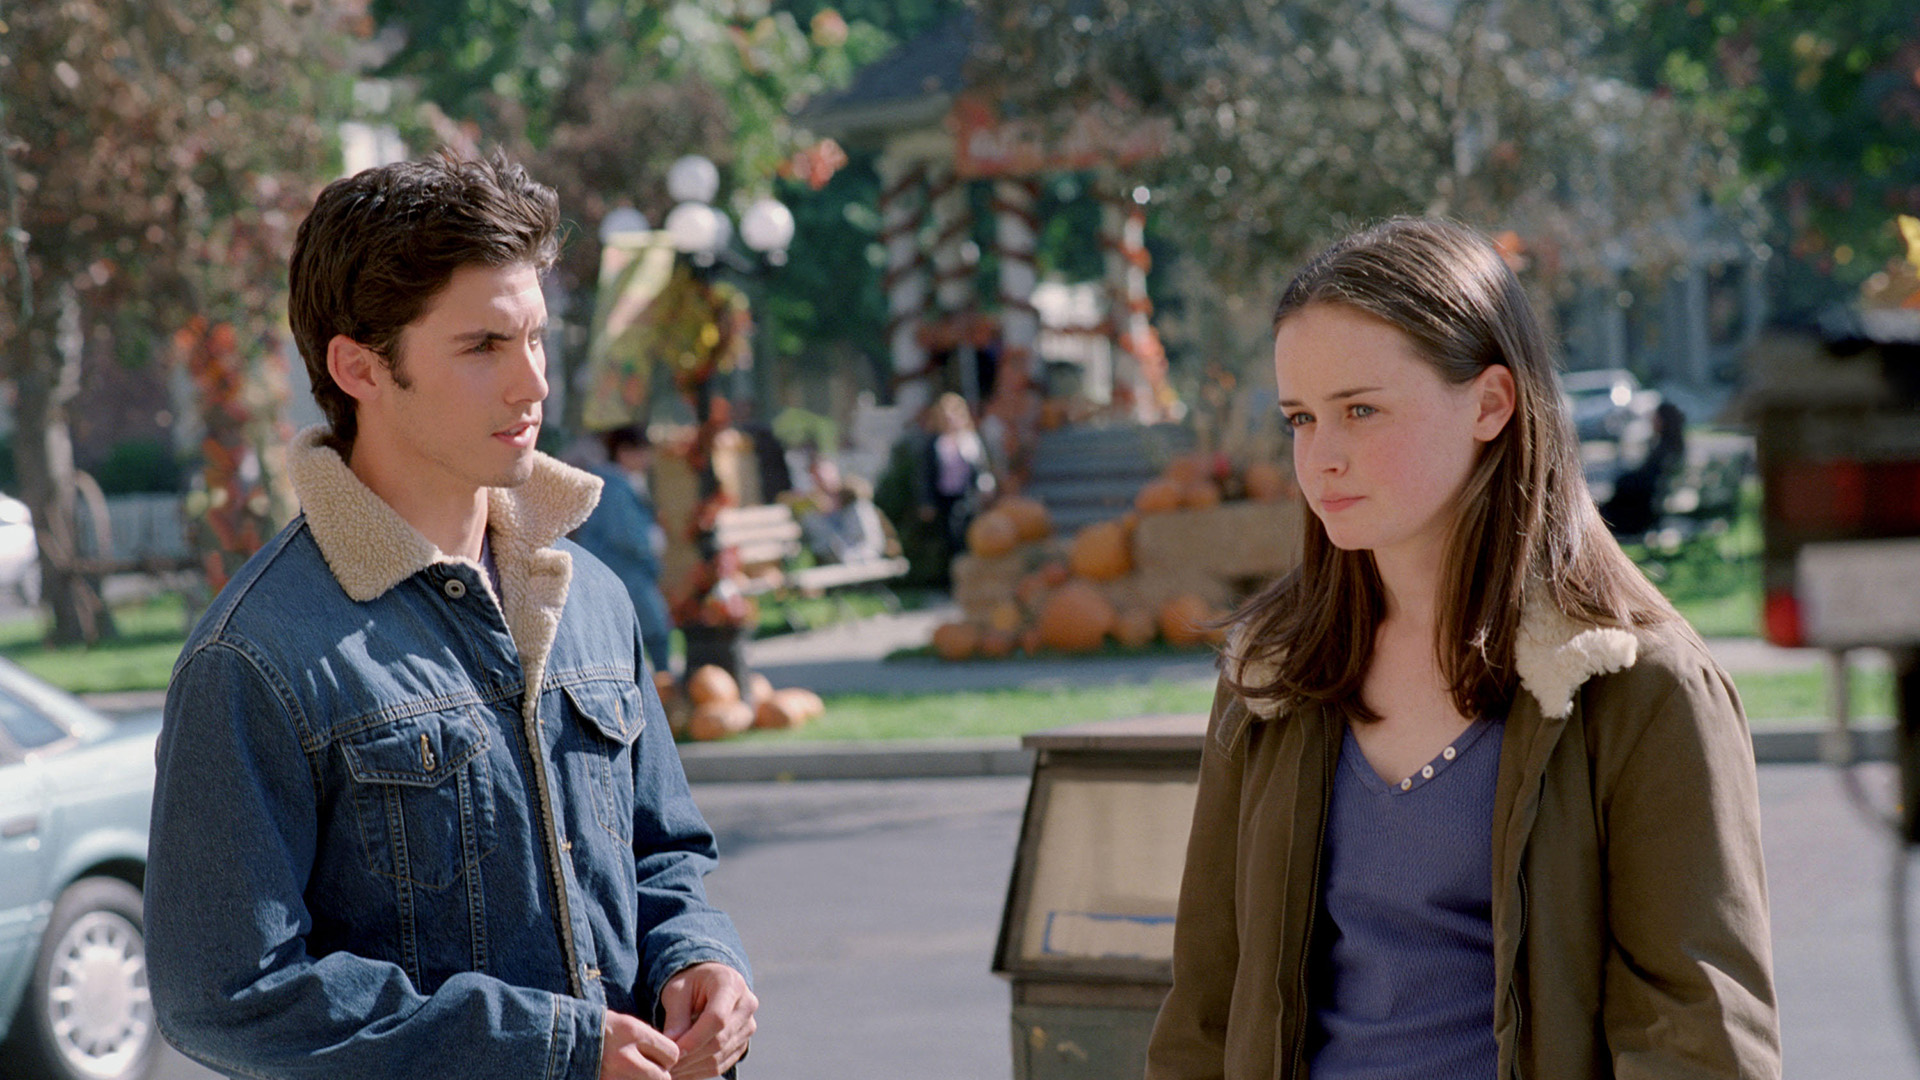 The Real Gilmore Girls Story: Are Alexis Bledel and Milo Ventimiglia Friends Off-Screen?